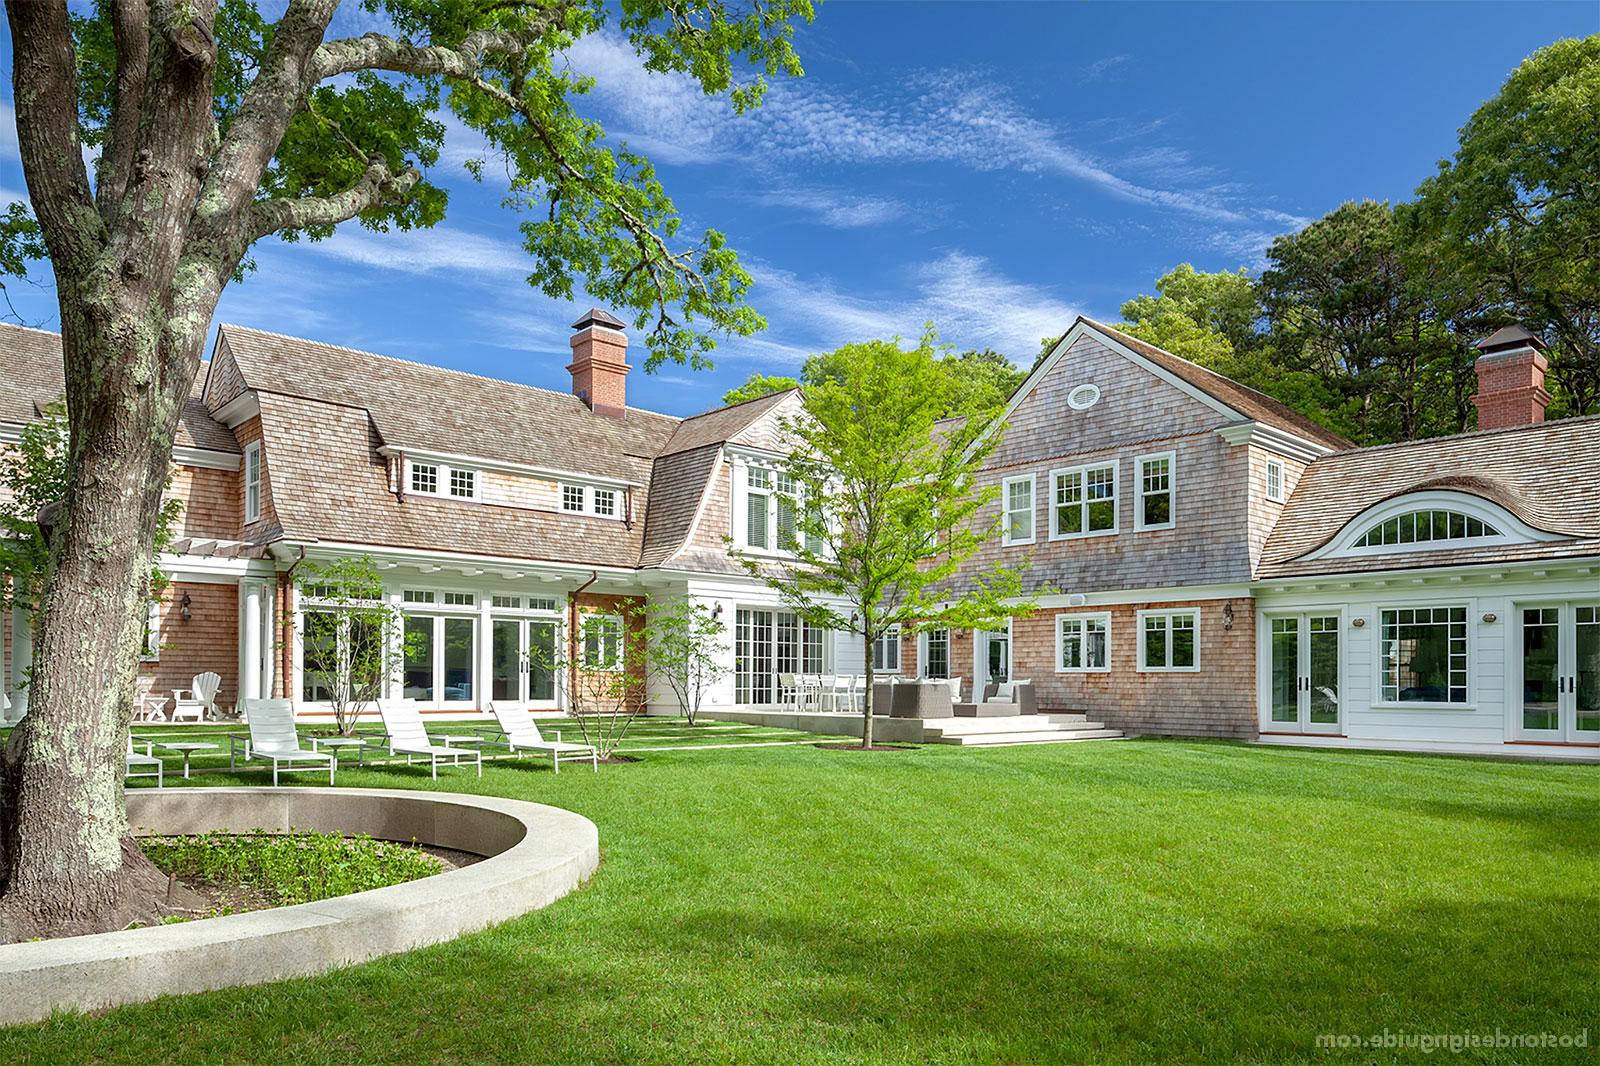 Gambrel Shingle Style Cape home designed by Catalano Architects and constructed by Travis Cundiff Associates, Inc.